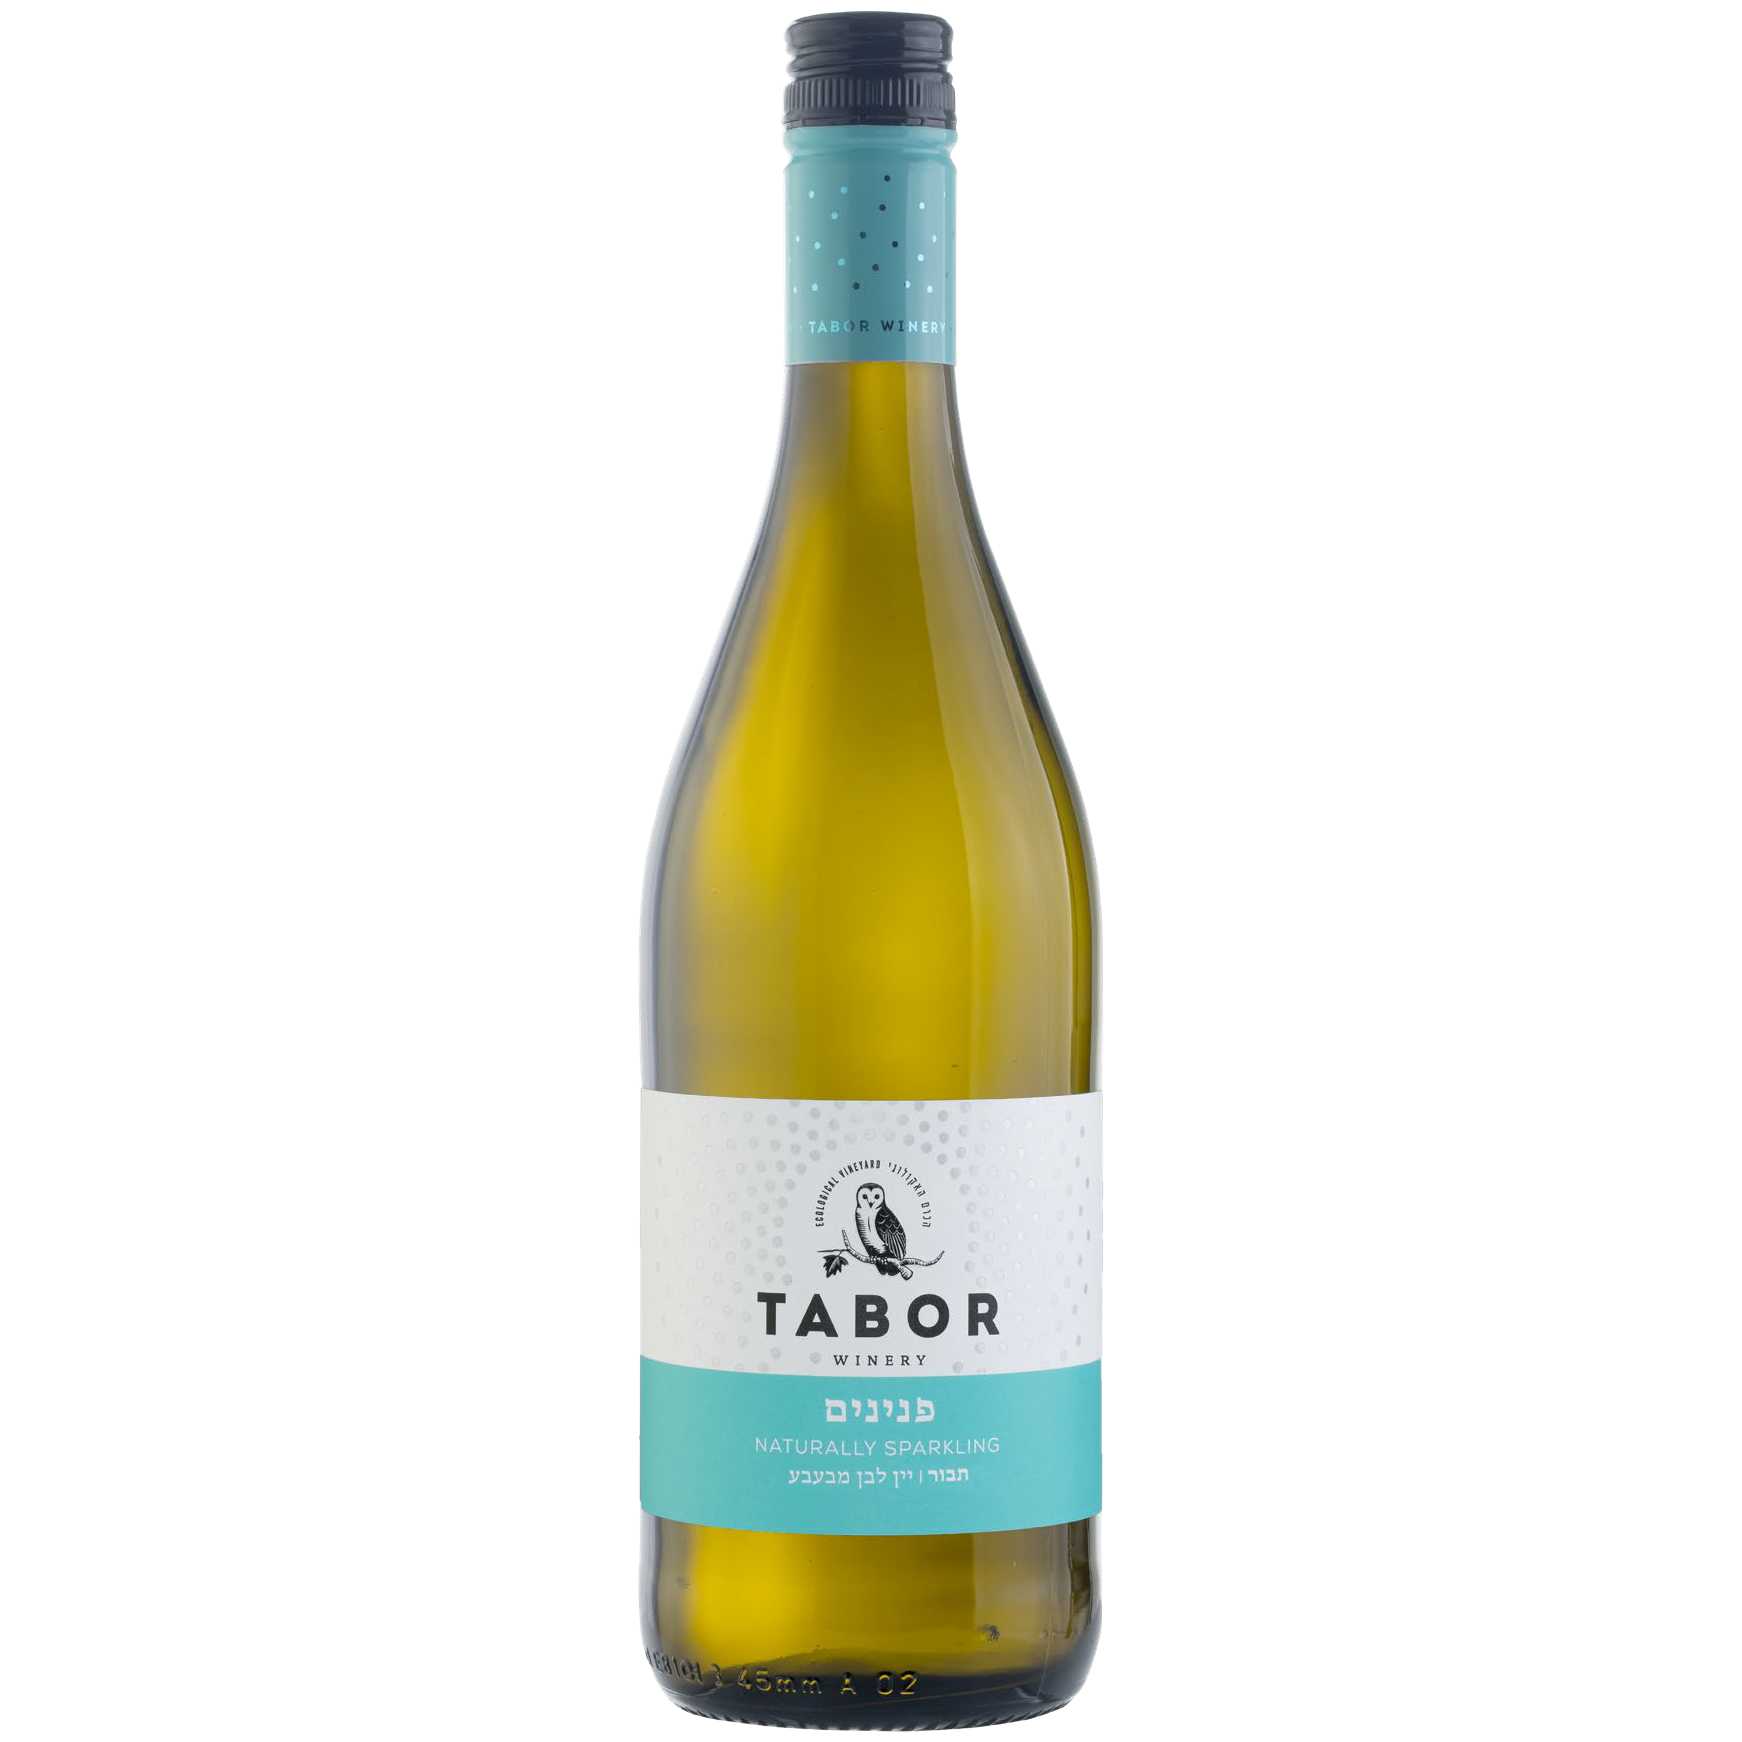 Tabor Pninim Sparkling White - A Kosher Wine From Israel